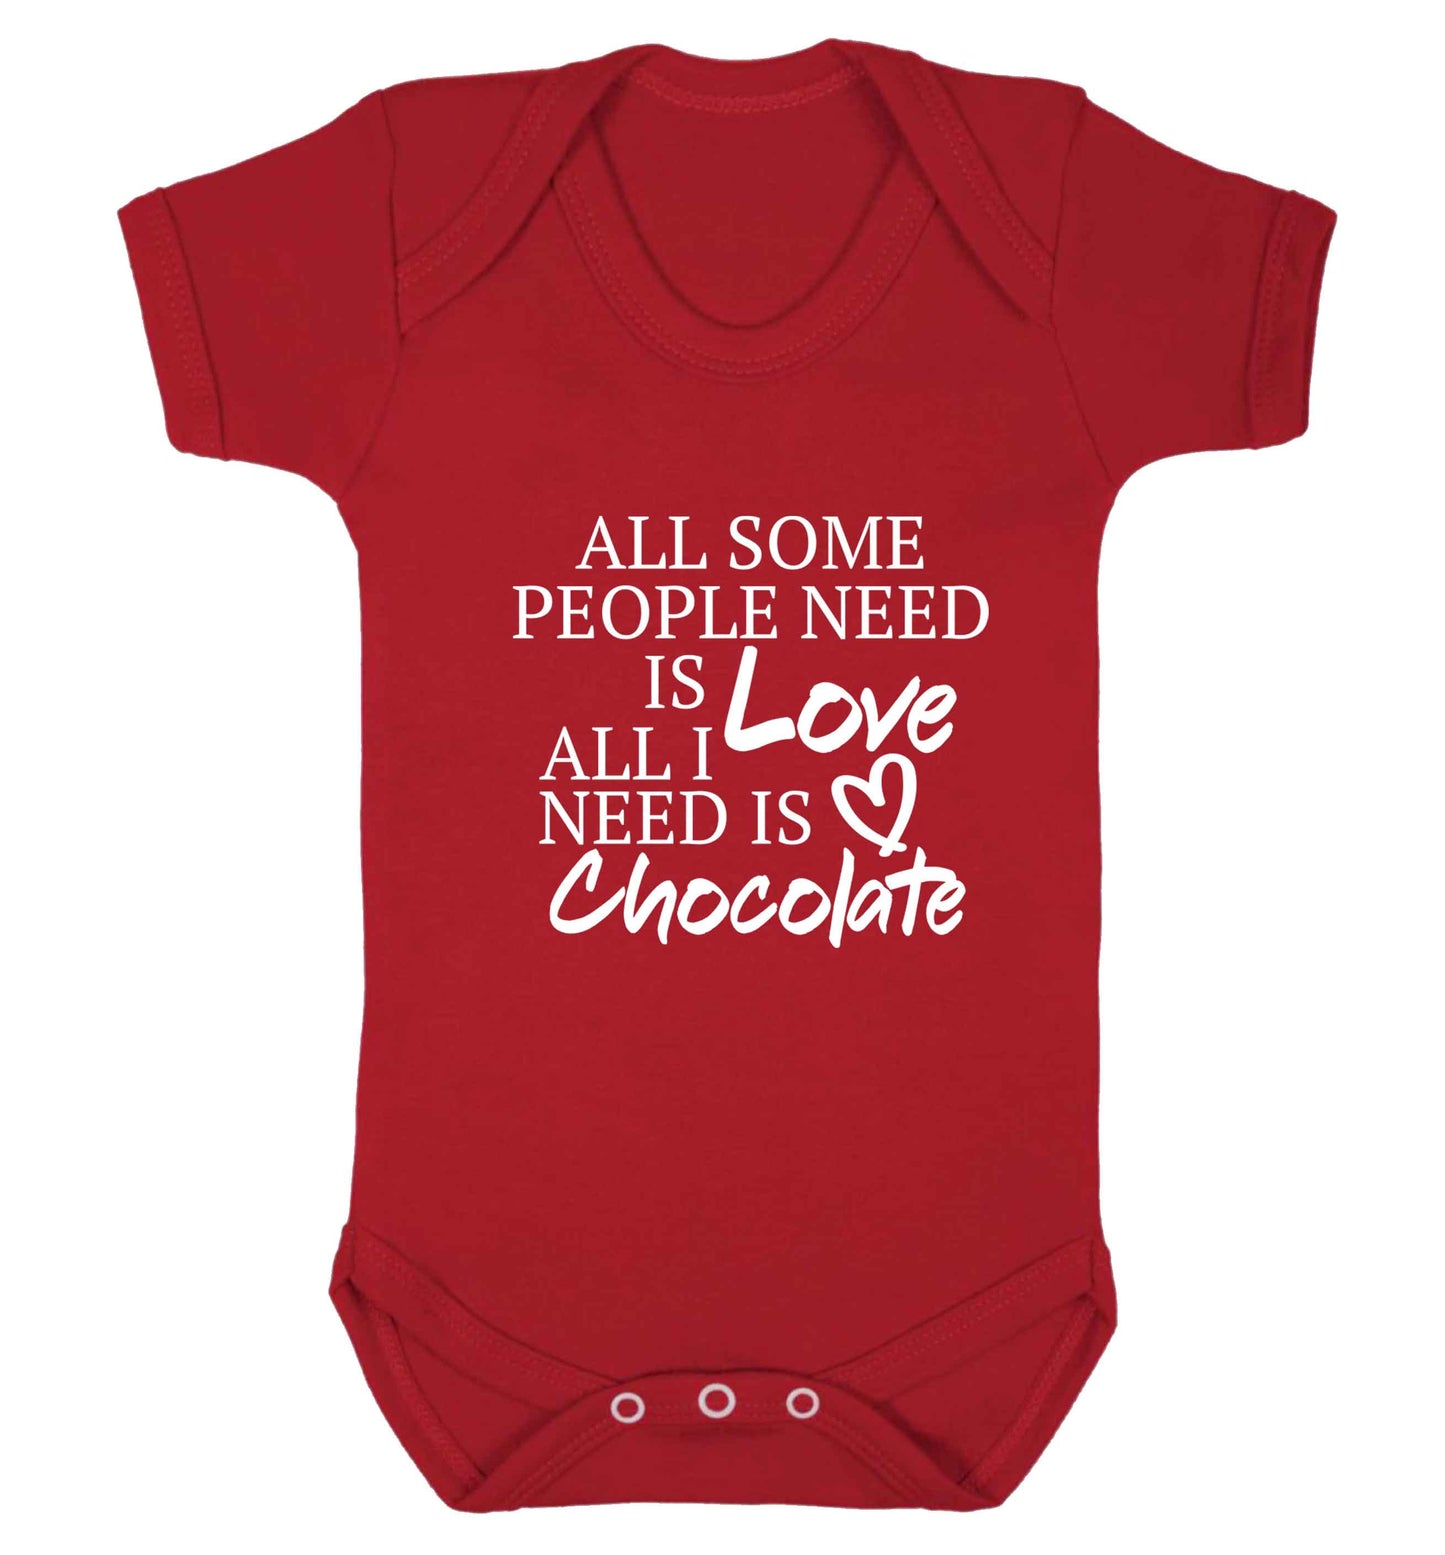 All some people need is love all I need is chocolate baby vest red 18-24 months